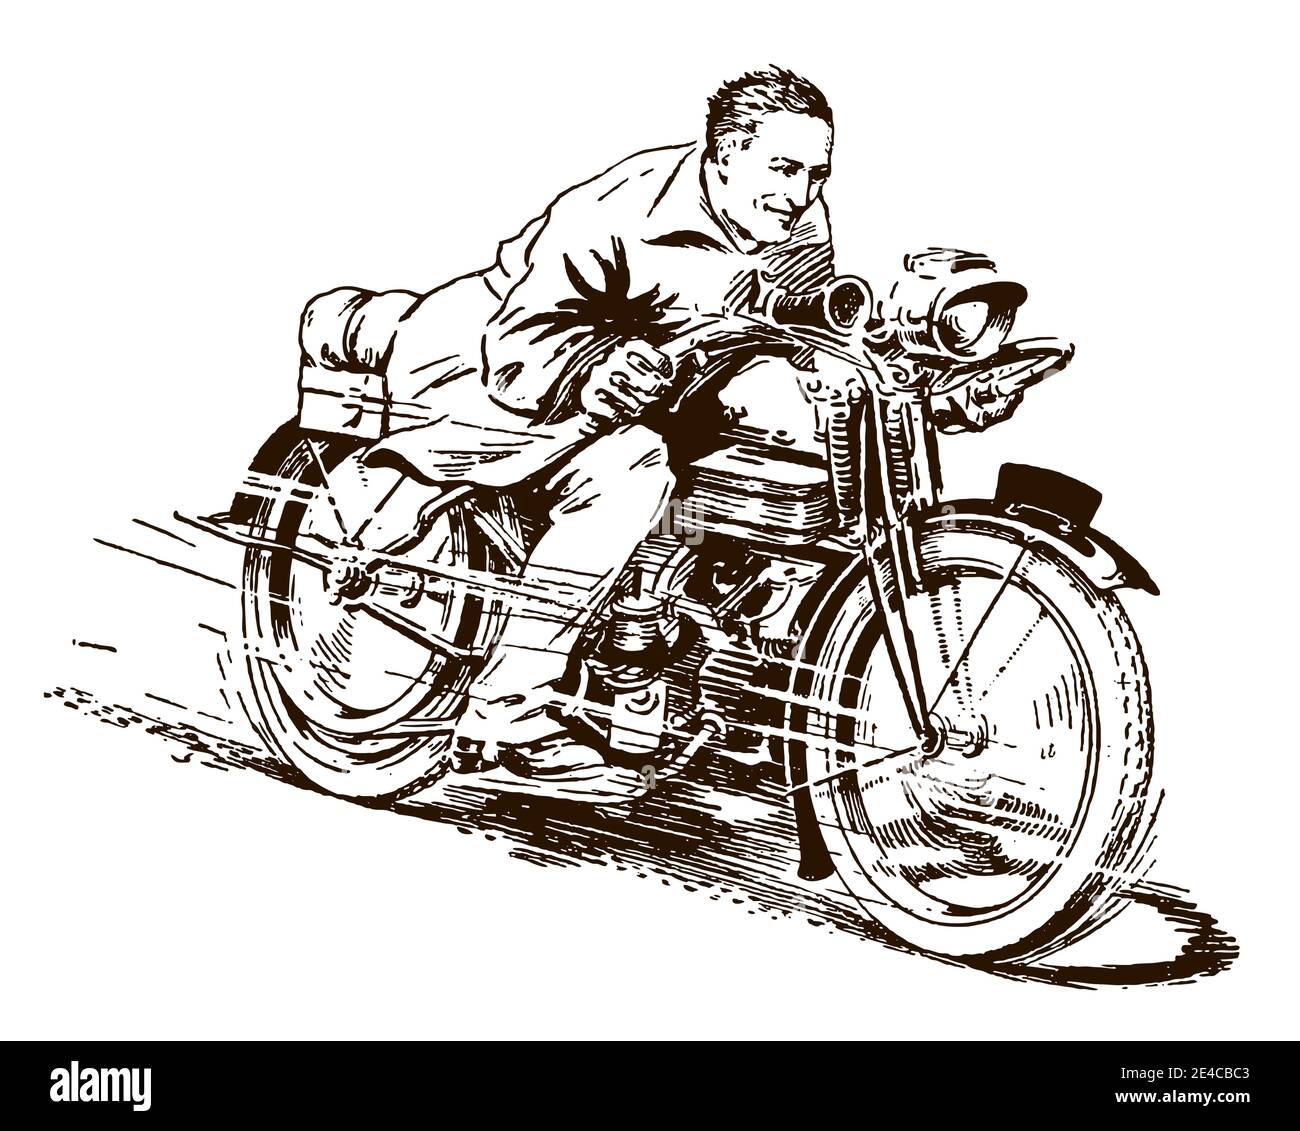 Man from the early 20th century riding a classic motorcycle at high speed Stock Vector